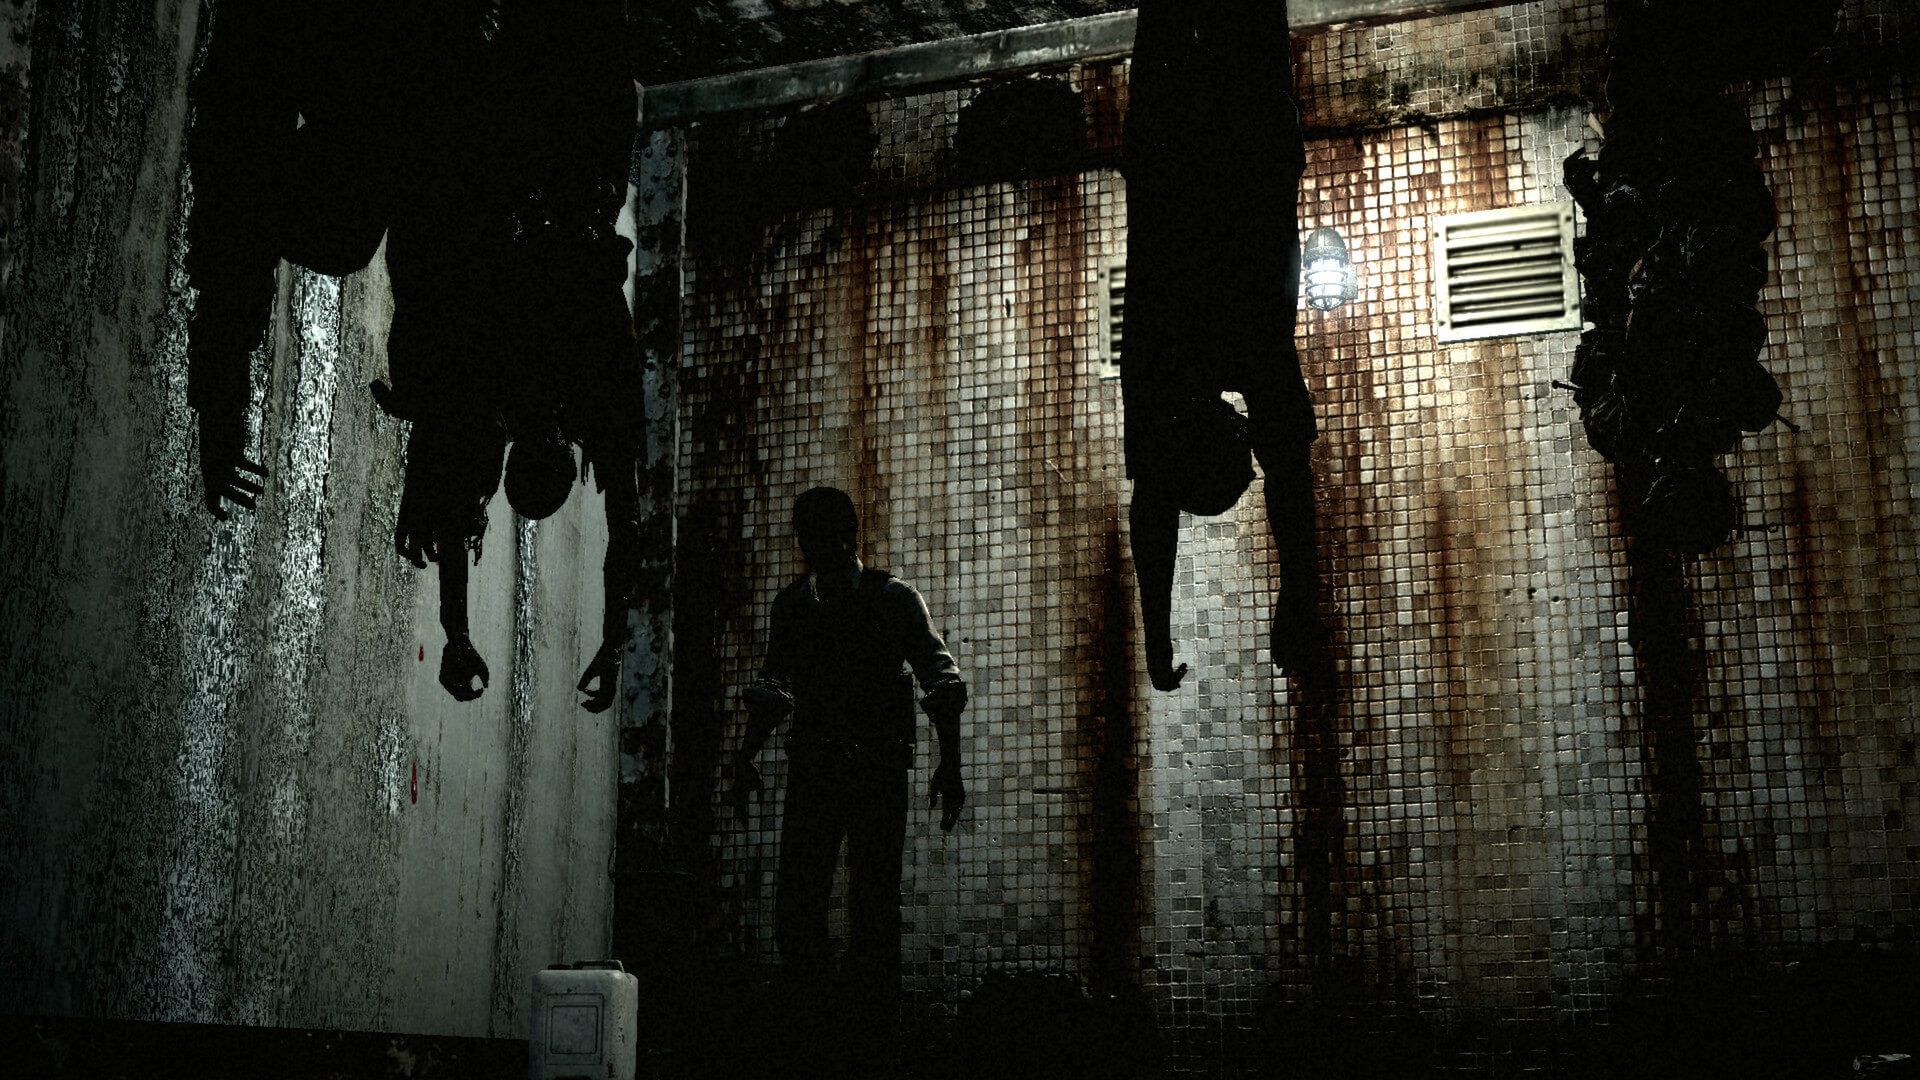 A gruesome scene of staged corpses in Shinji Mikami's horror film The Evil Within